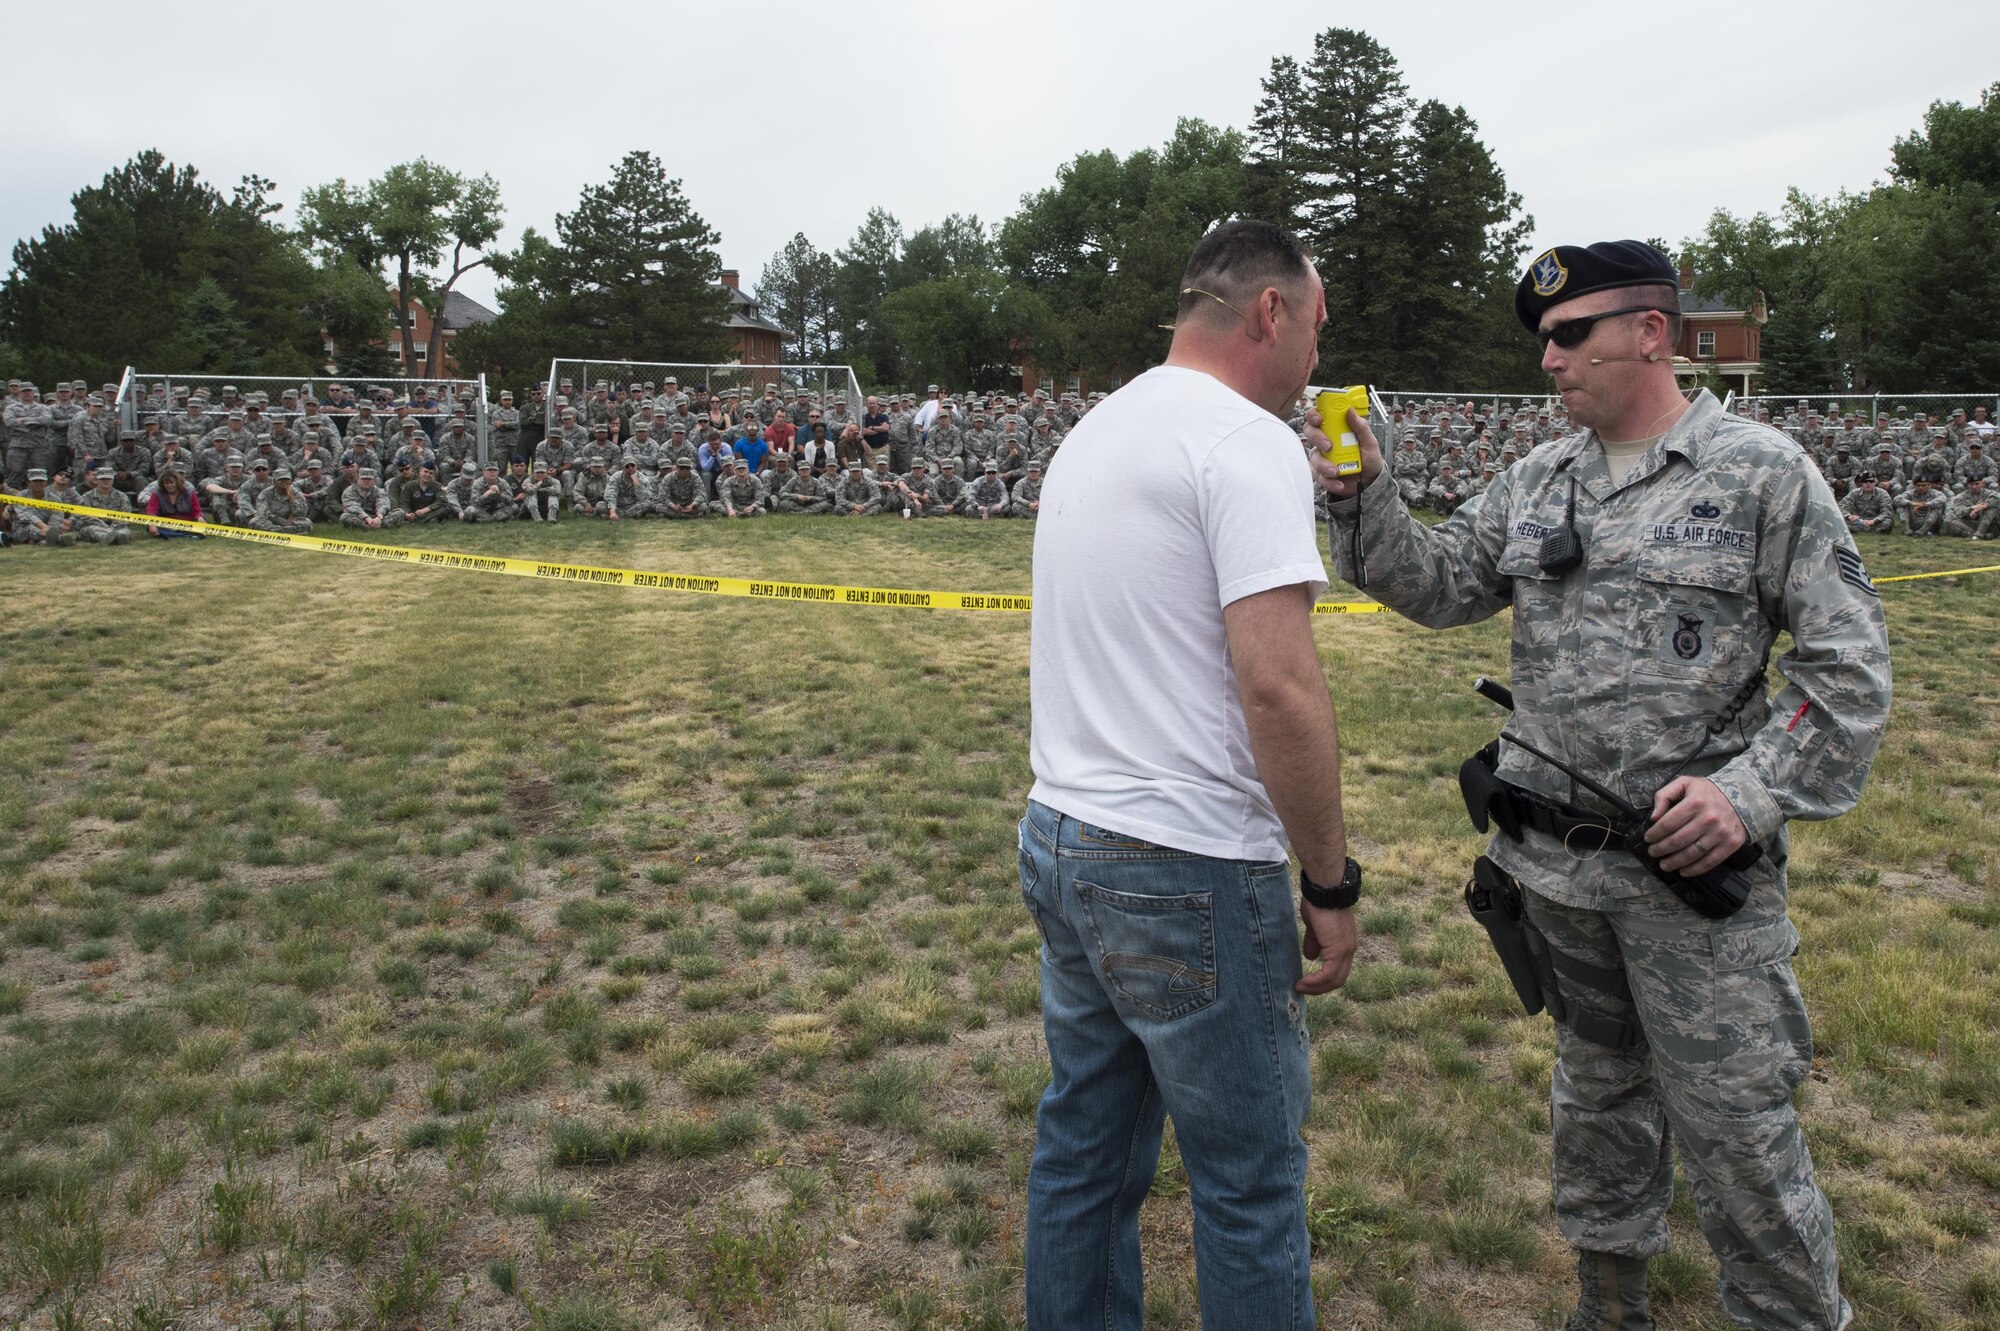 Staff Sgt. James Hebert, a 90th Security Forces Squadron member, administers a breathalyzer test to Staff Sgt. Johnathan Avila, 90th Civil Engineering Squadron water and fuels system technician, during a drinking and driving awareness event at F.E. Warren Air Force Base, Wyo., June 30, 2016. More than 200 Airman from the 90th Missile Wing attended the event to witness firsthand the devastating effects of a DUI. (U.S. Air Force photo by Staff Sgt. Christopher Ruano)